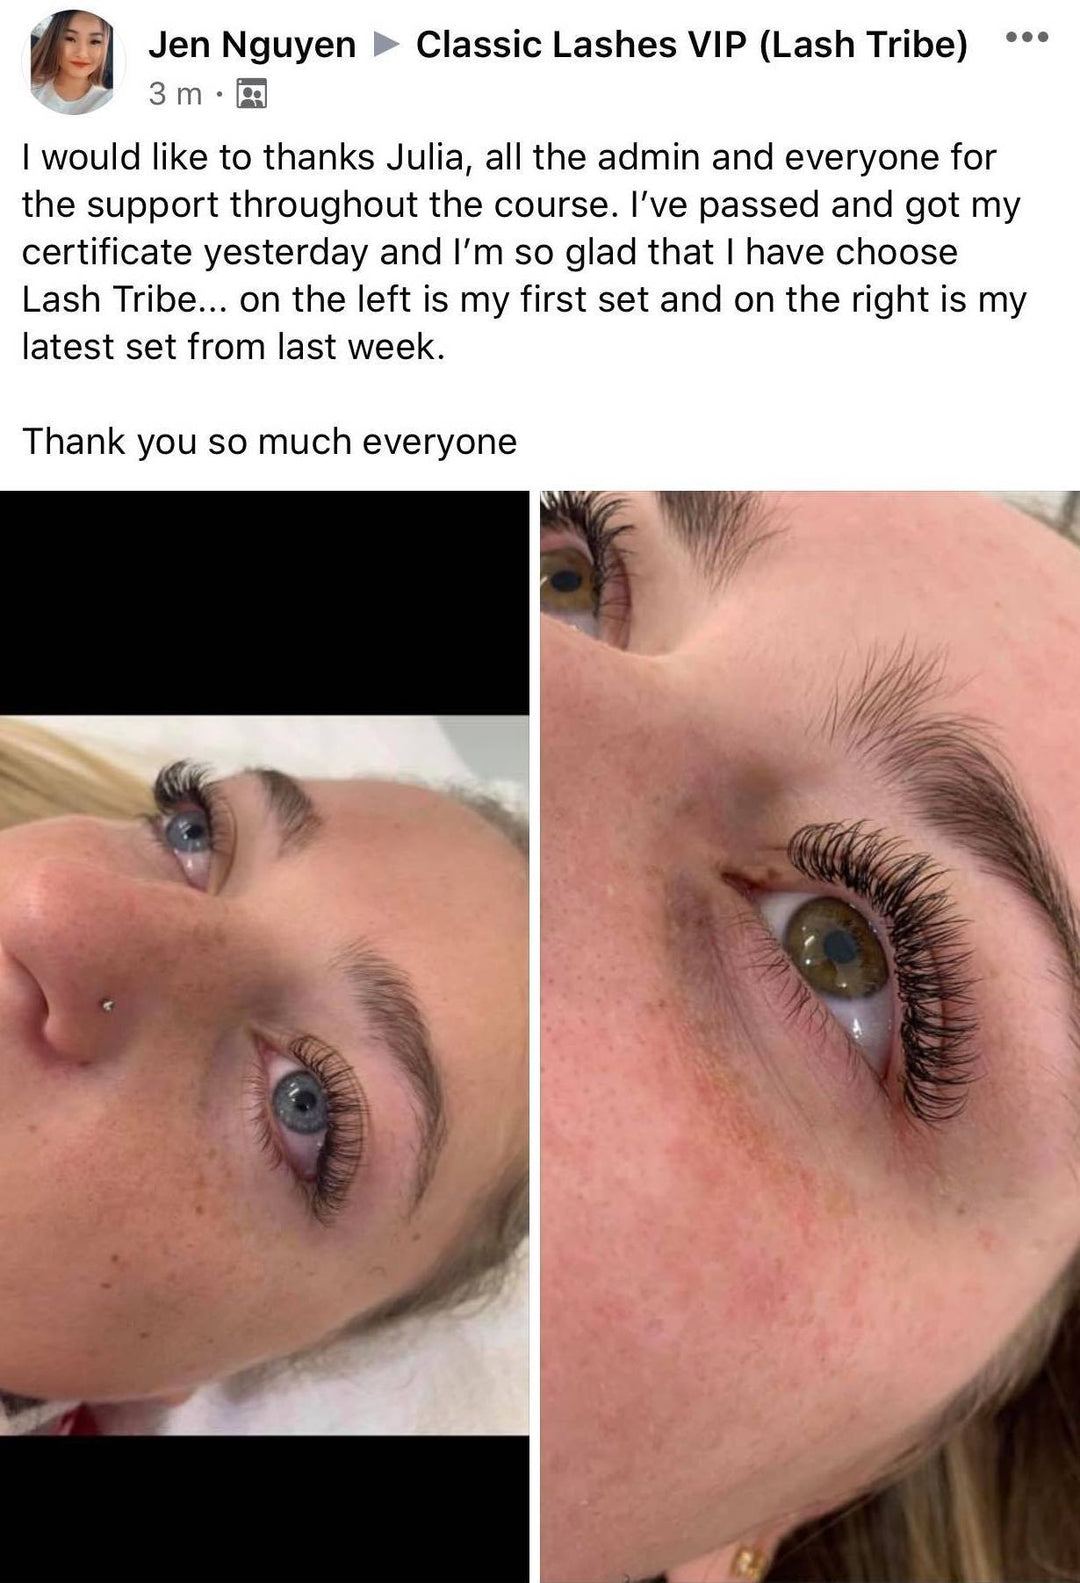 a photo of a woman's eyelashes before and after the Classic Beginners Fundamentals | Online Eyelash Extension Course by Lash Tribe.